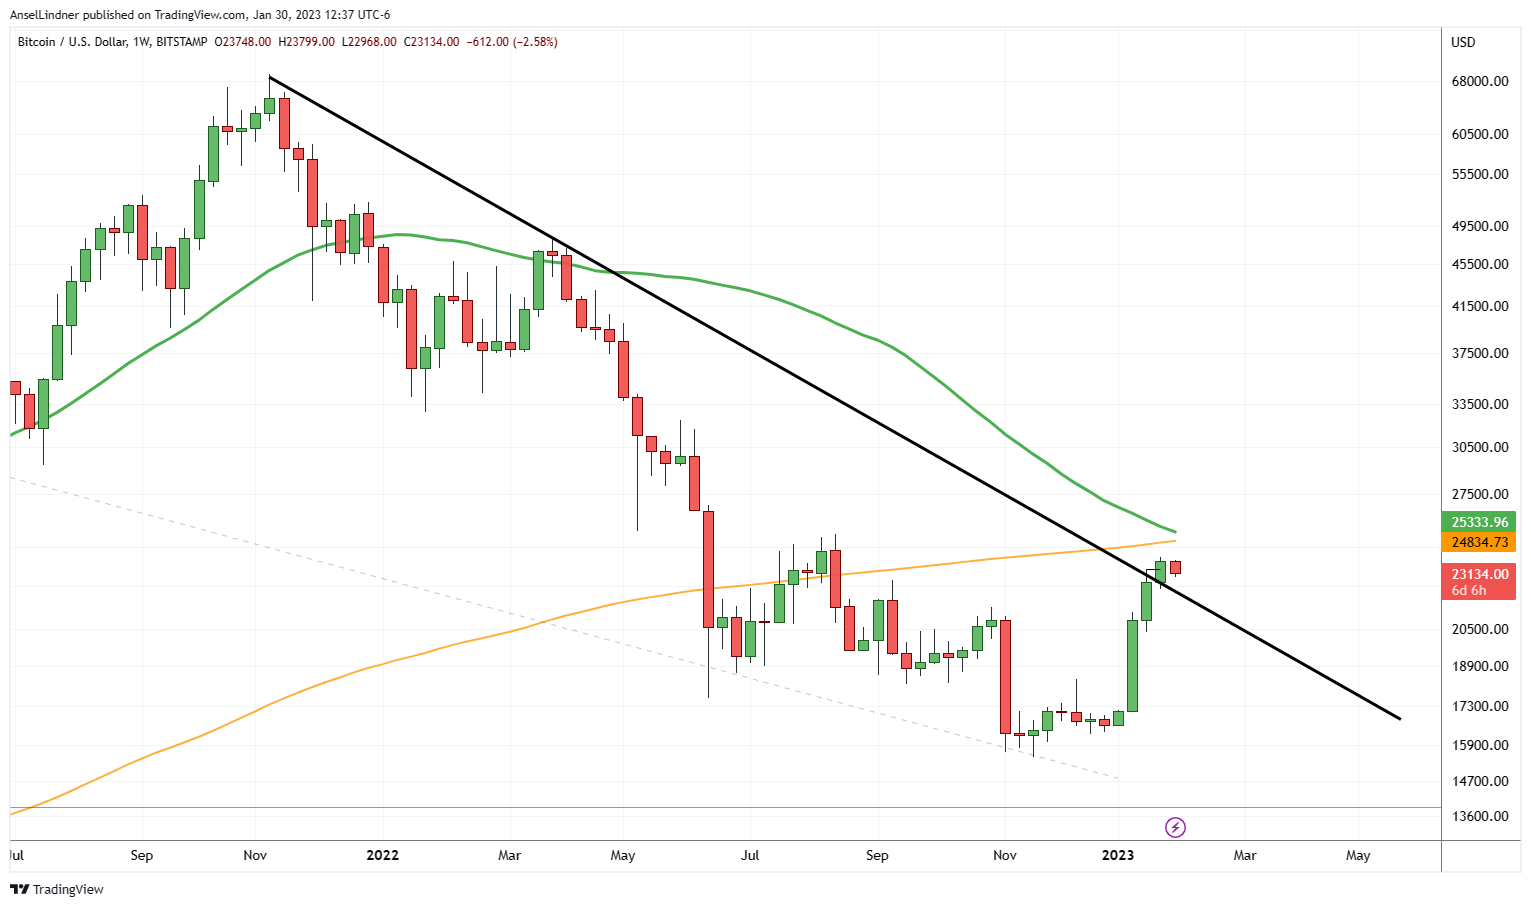 Bitcoin weekly chart with trend line and 50 and 200-week moving averages